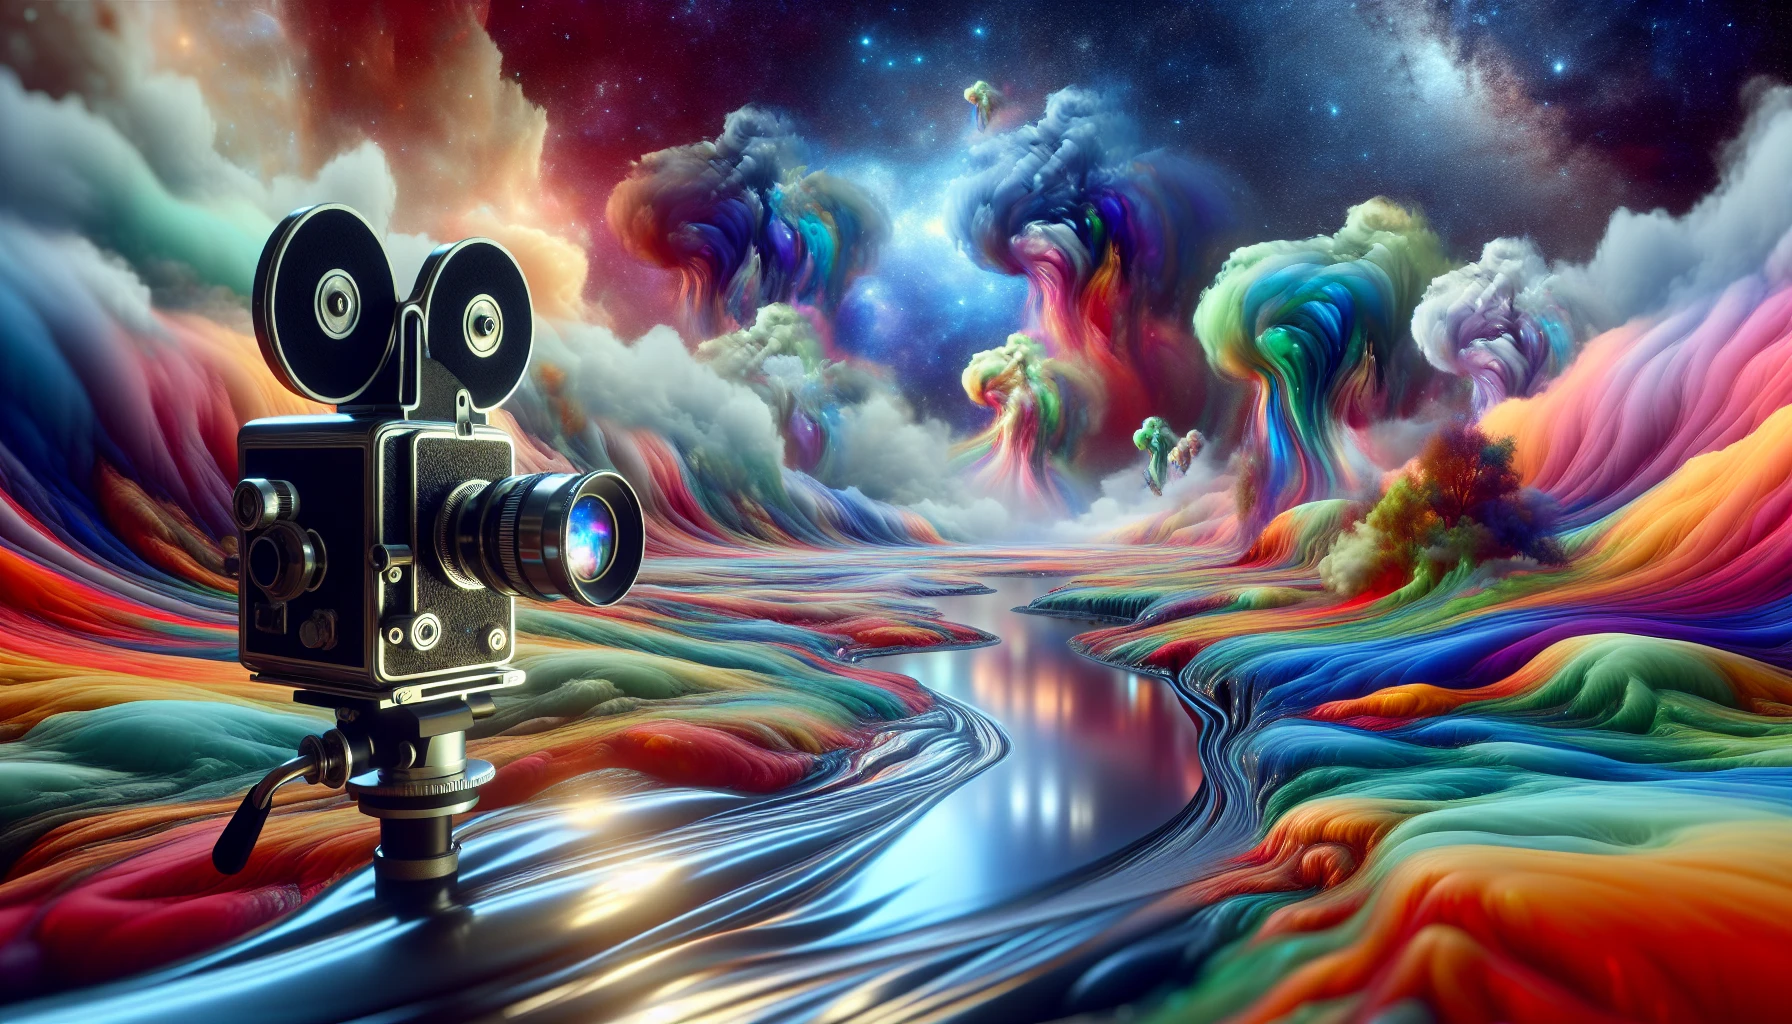 A mesmerizing and colorful illustration of a surreal movie scene with vibrant visuals and otherworldly landscapes.